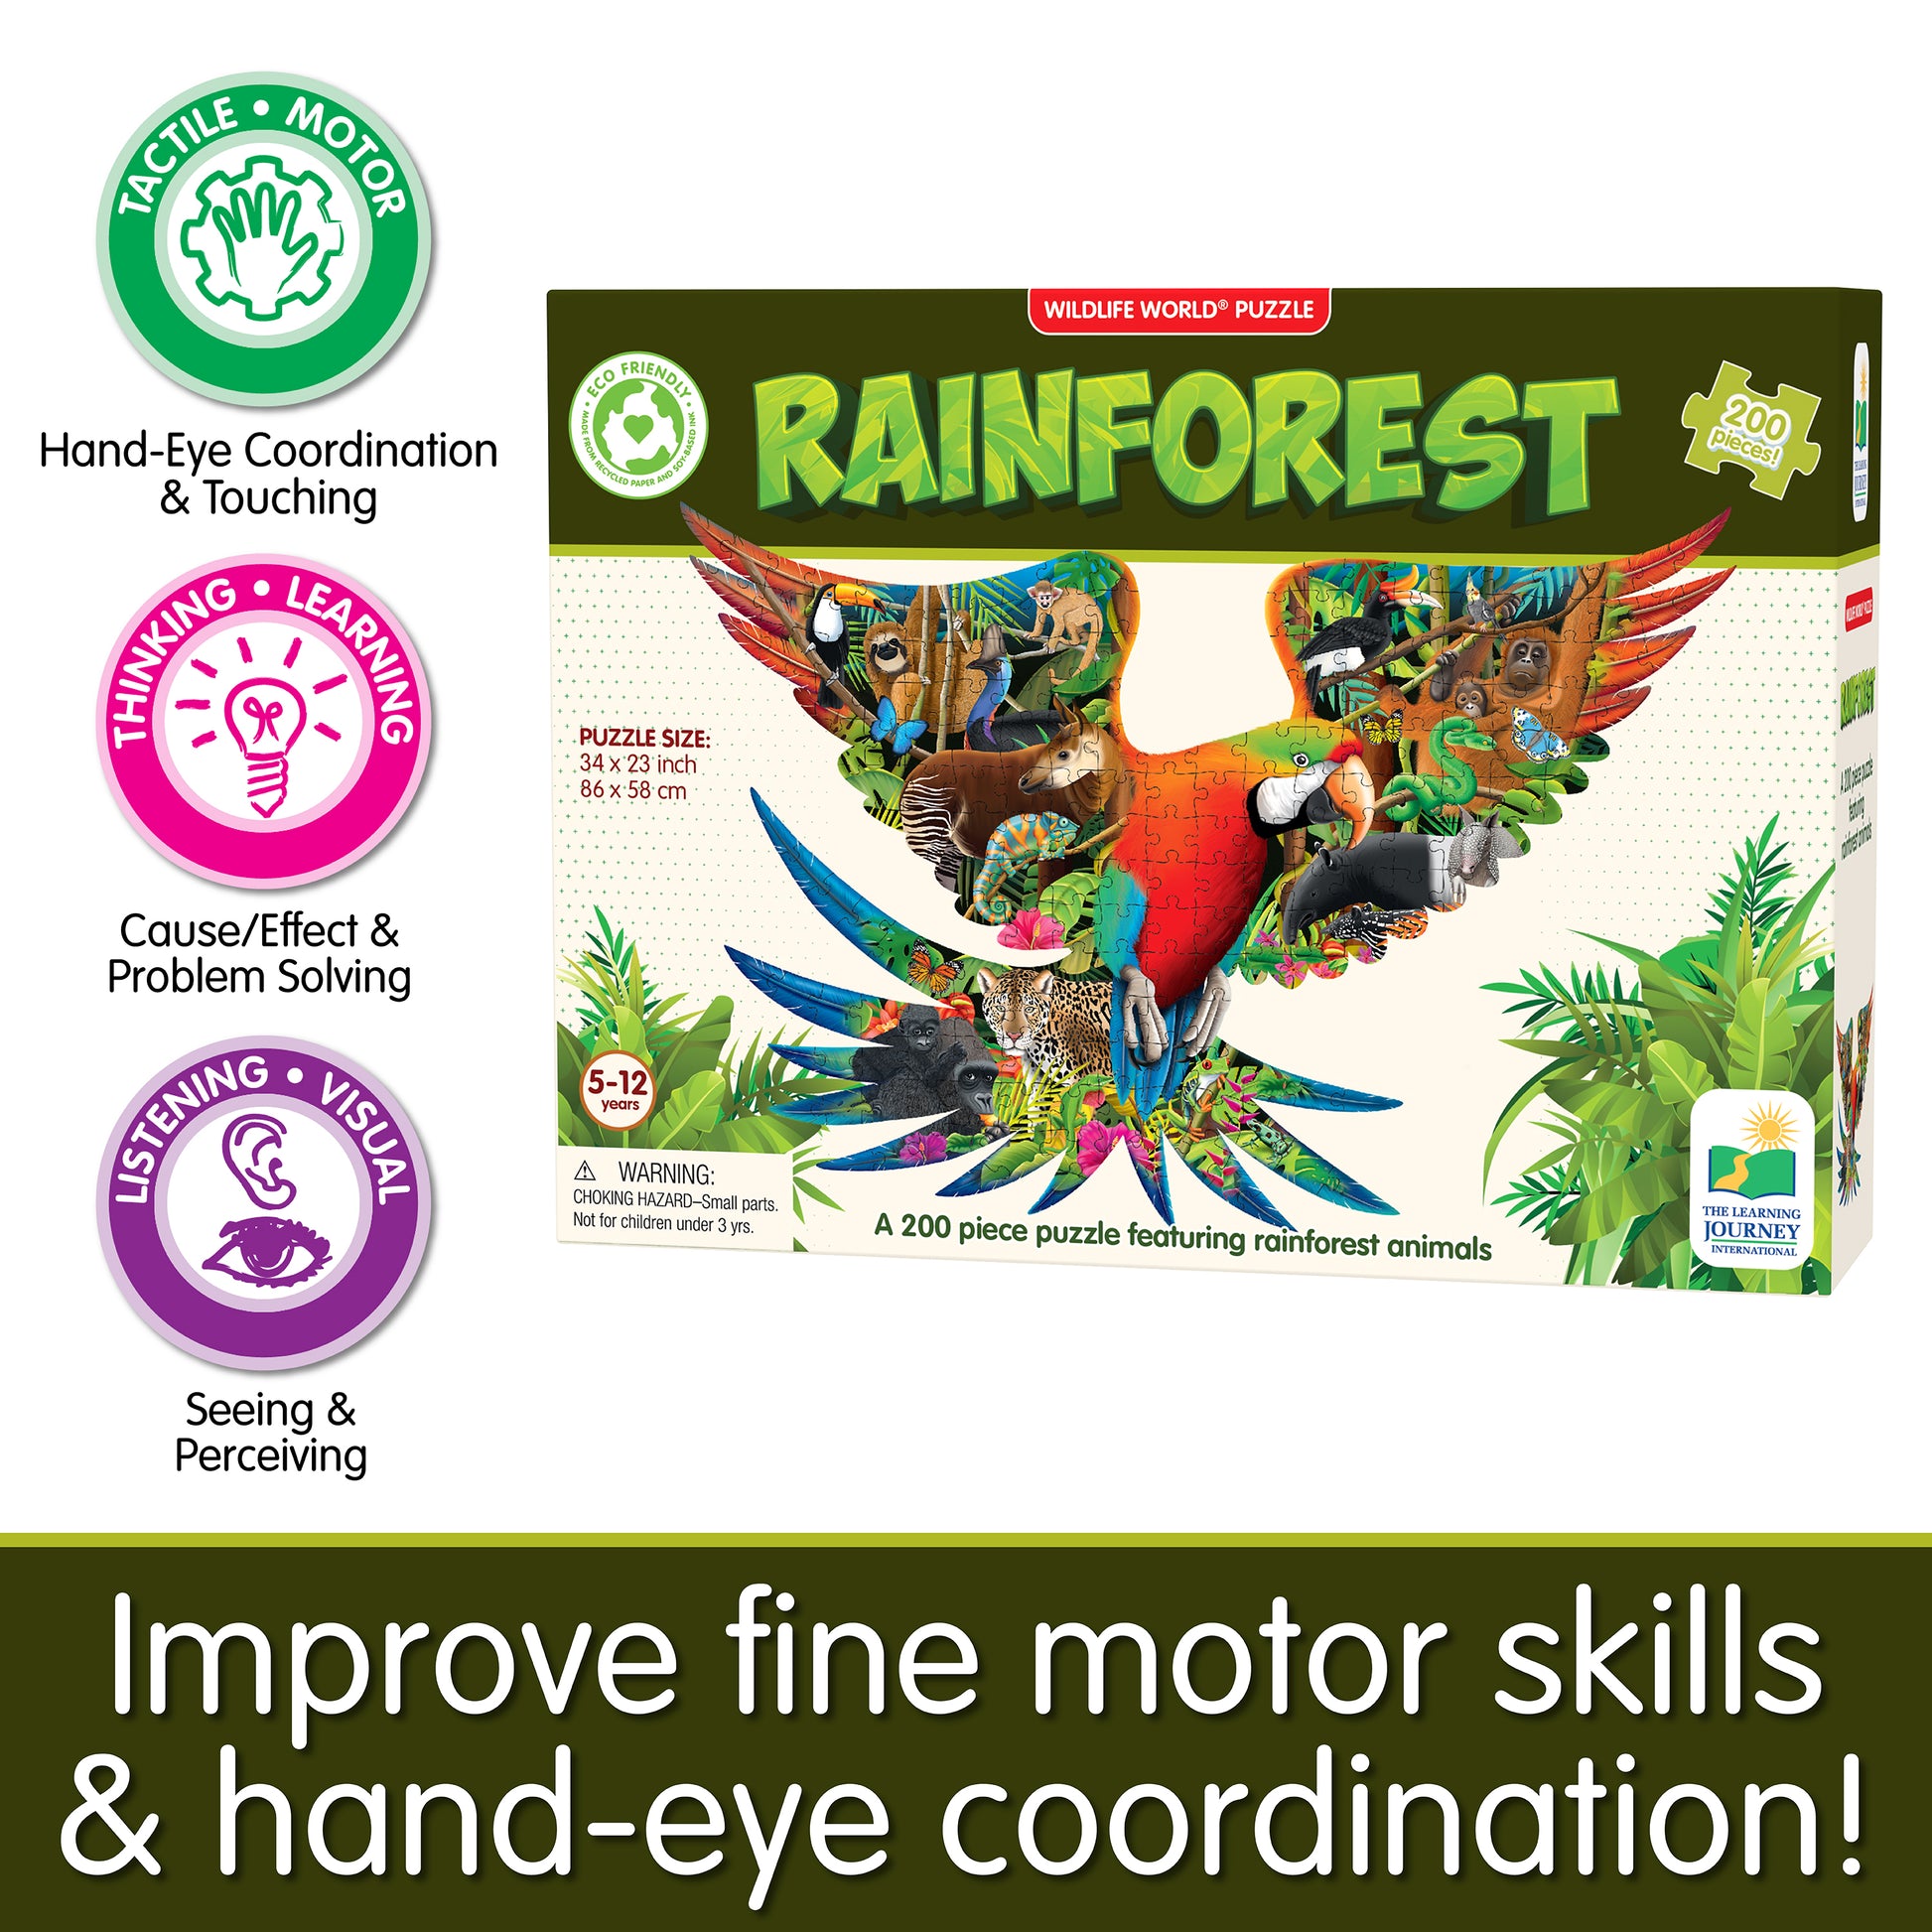 Infographic about Wildlife World Rainforest Puzzle's educational benefits